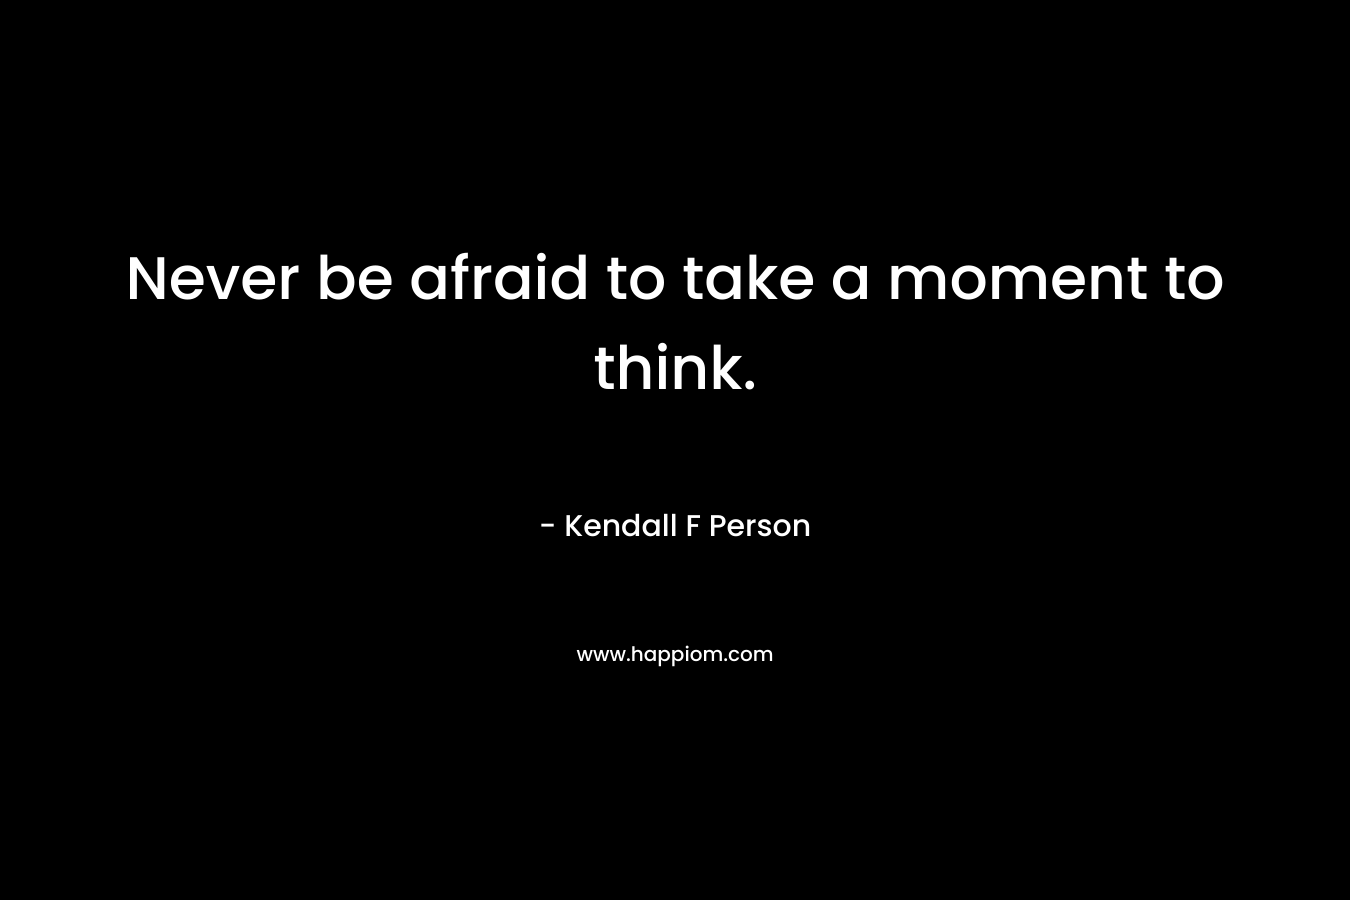 Never be afraid to take a moment to think. – Kendall F Person